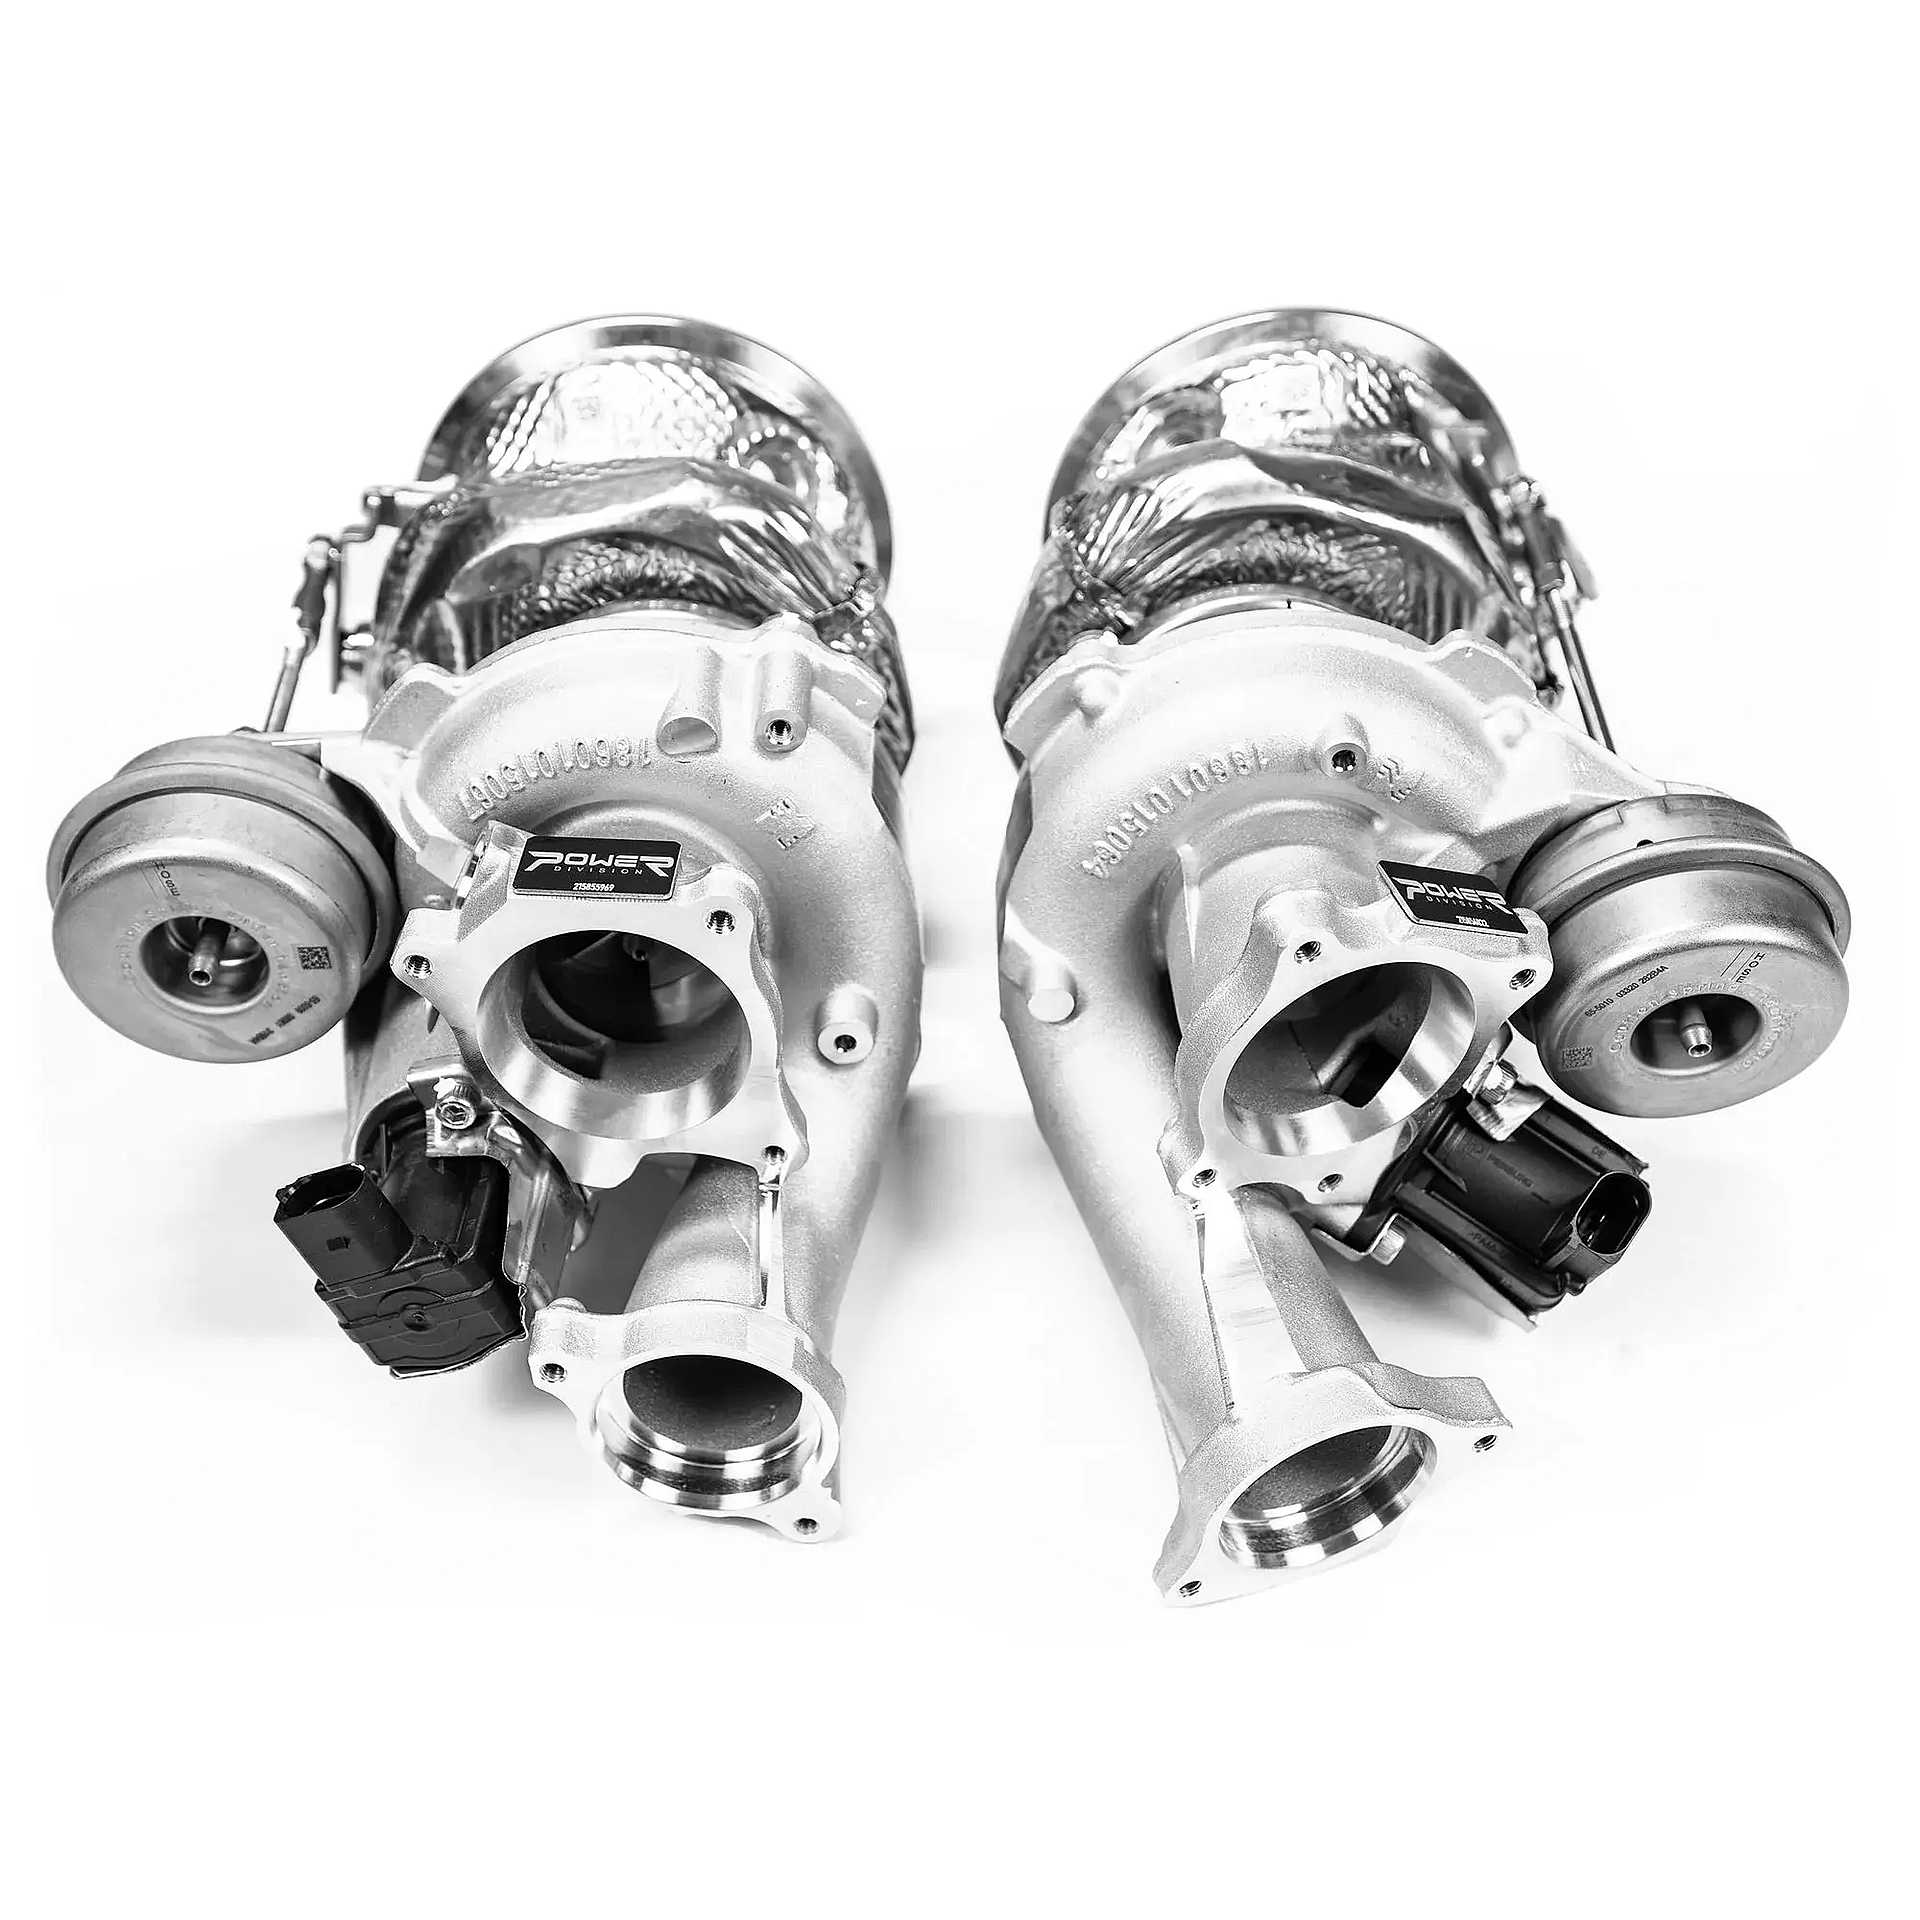 RSQ8/SQ7/SQ8/Urus exhaust manifold with PD1200 turbochargers Power Division